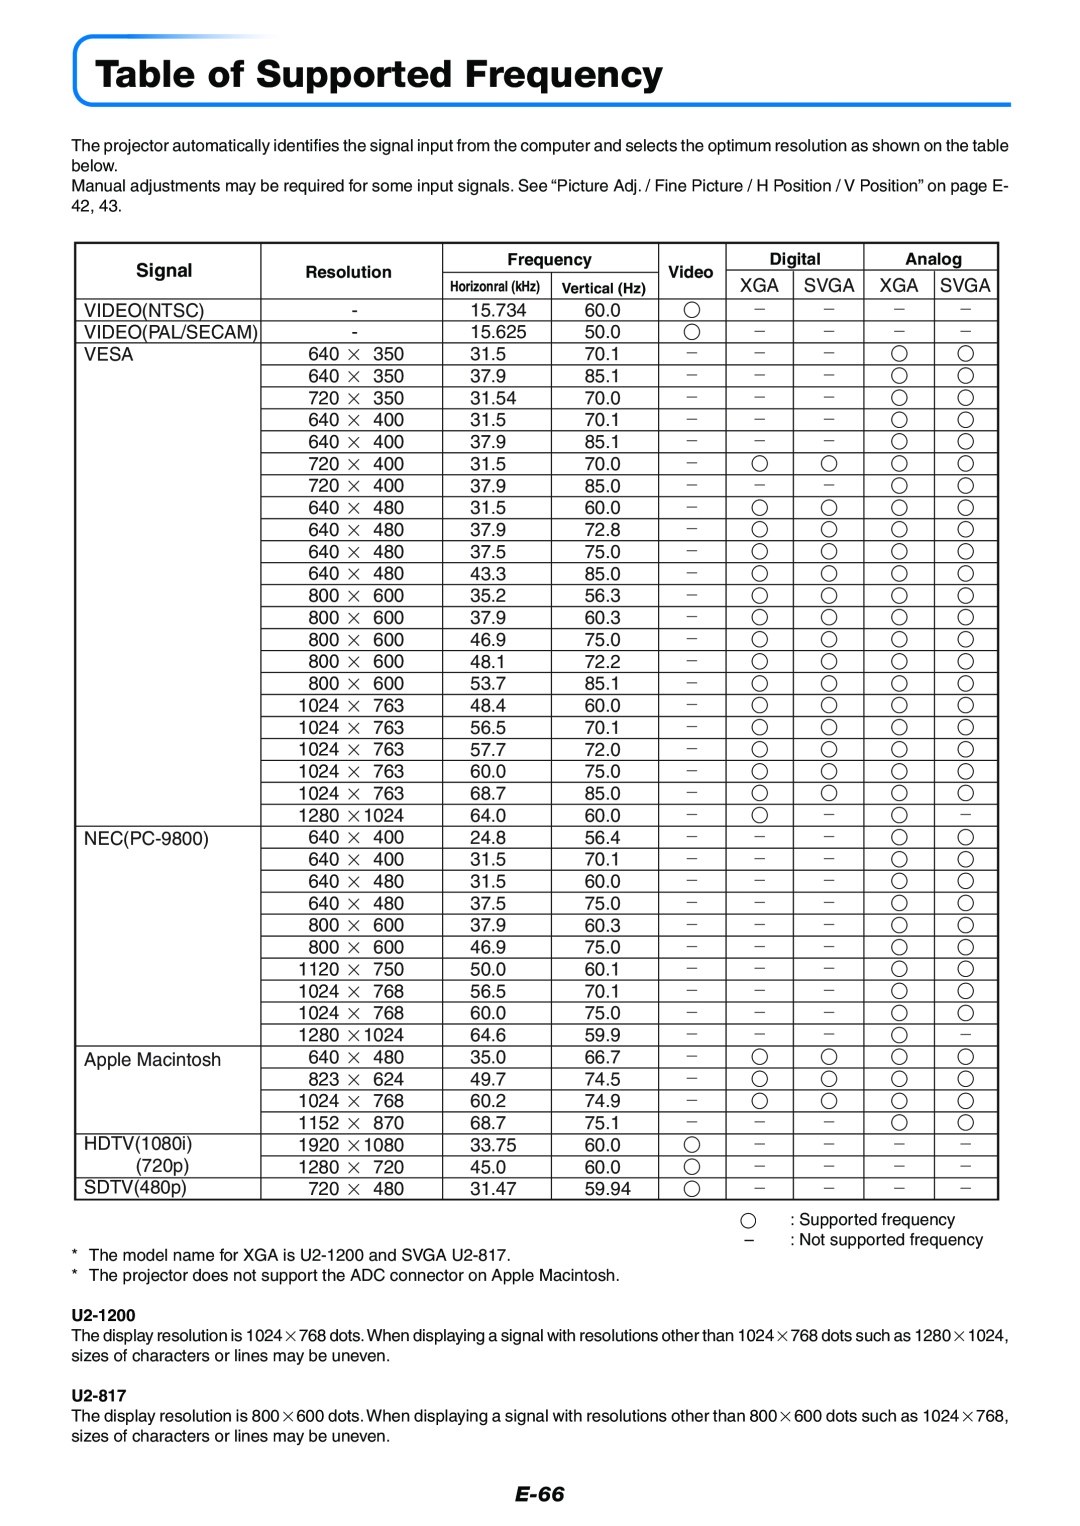 PLUS Vision Data Projector user manual Table of Supported Frequency, E-66, Signal 